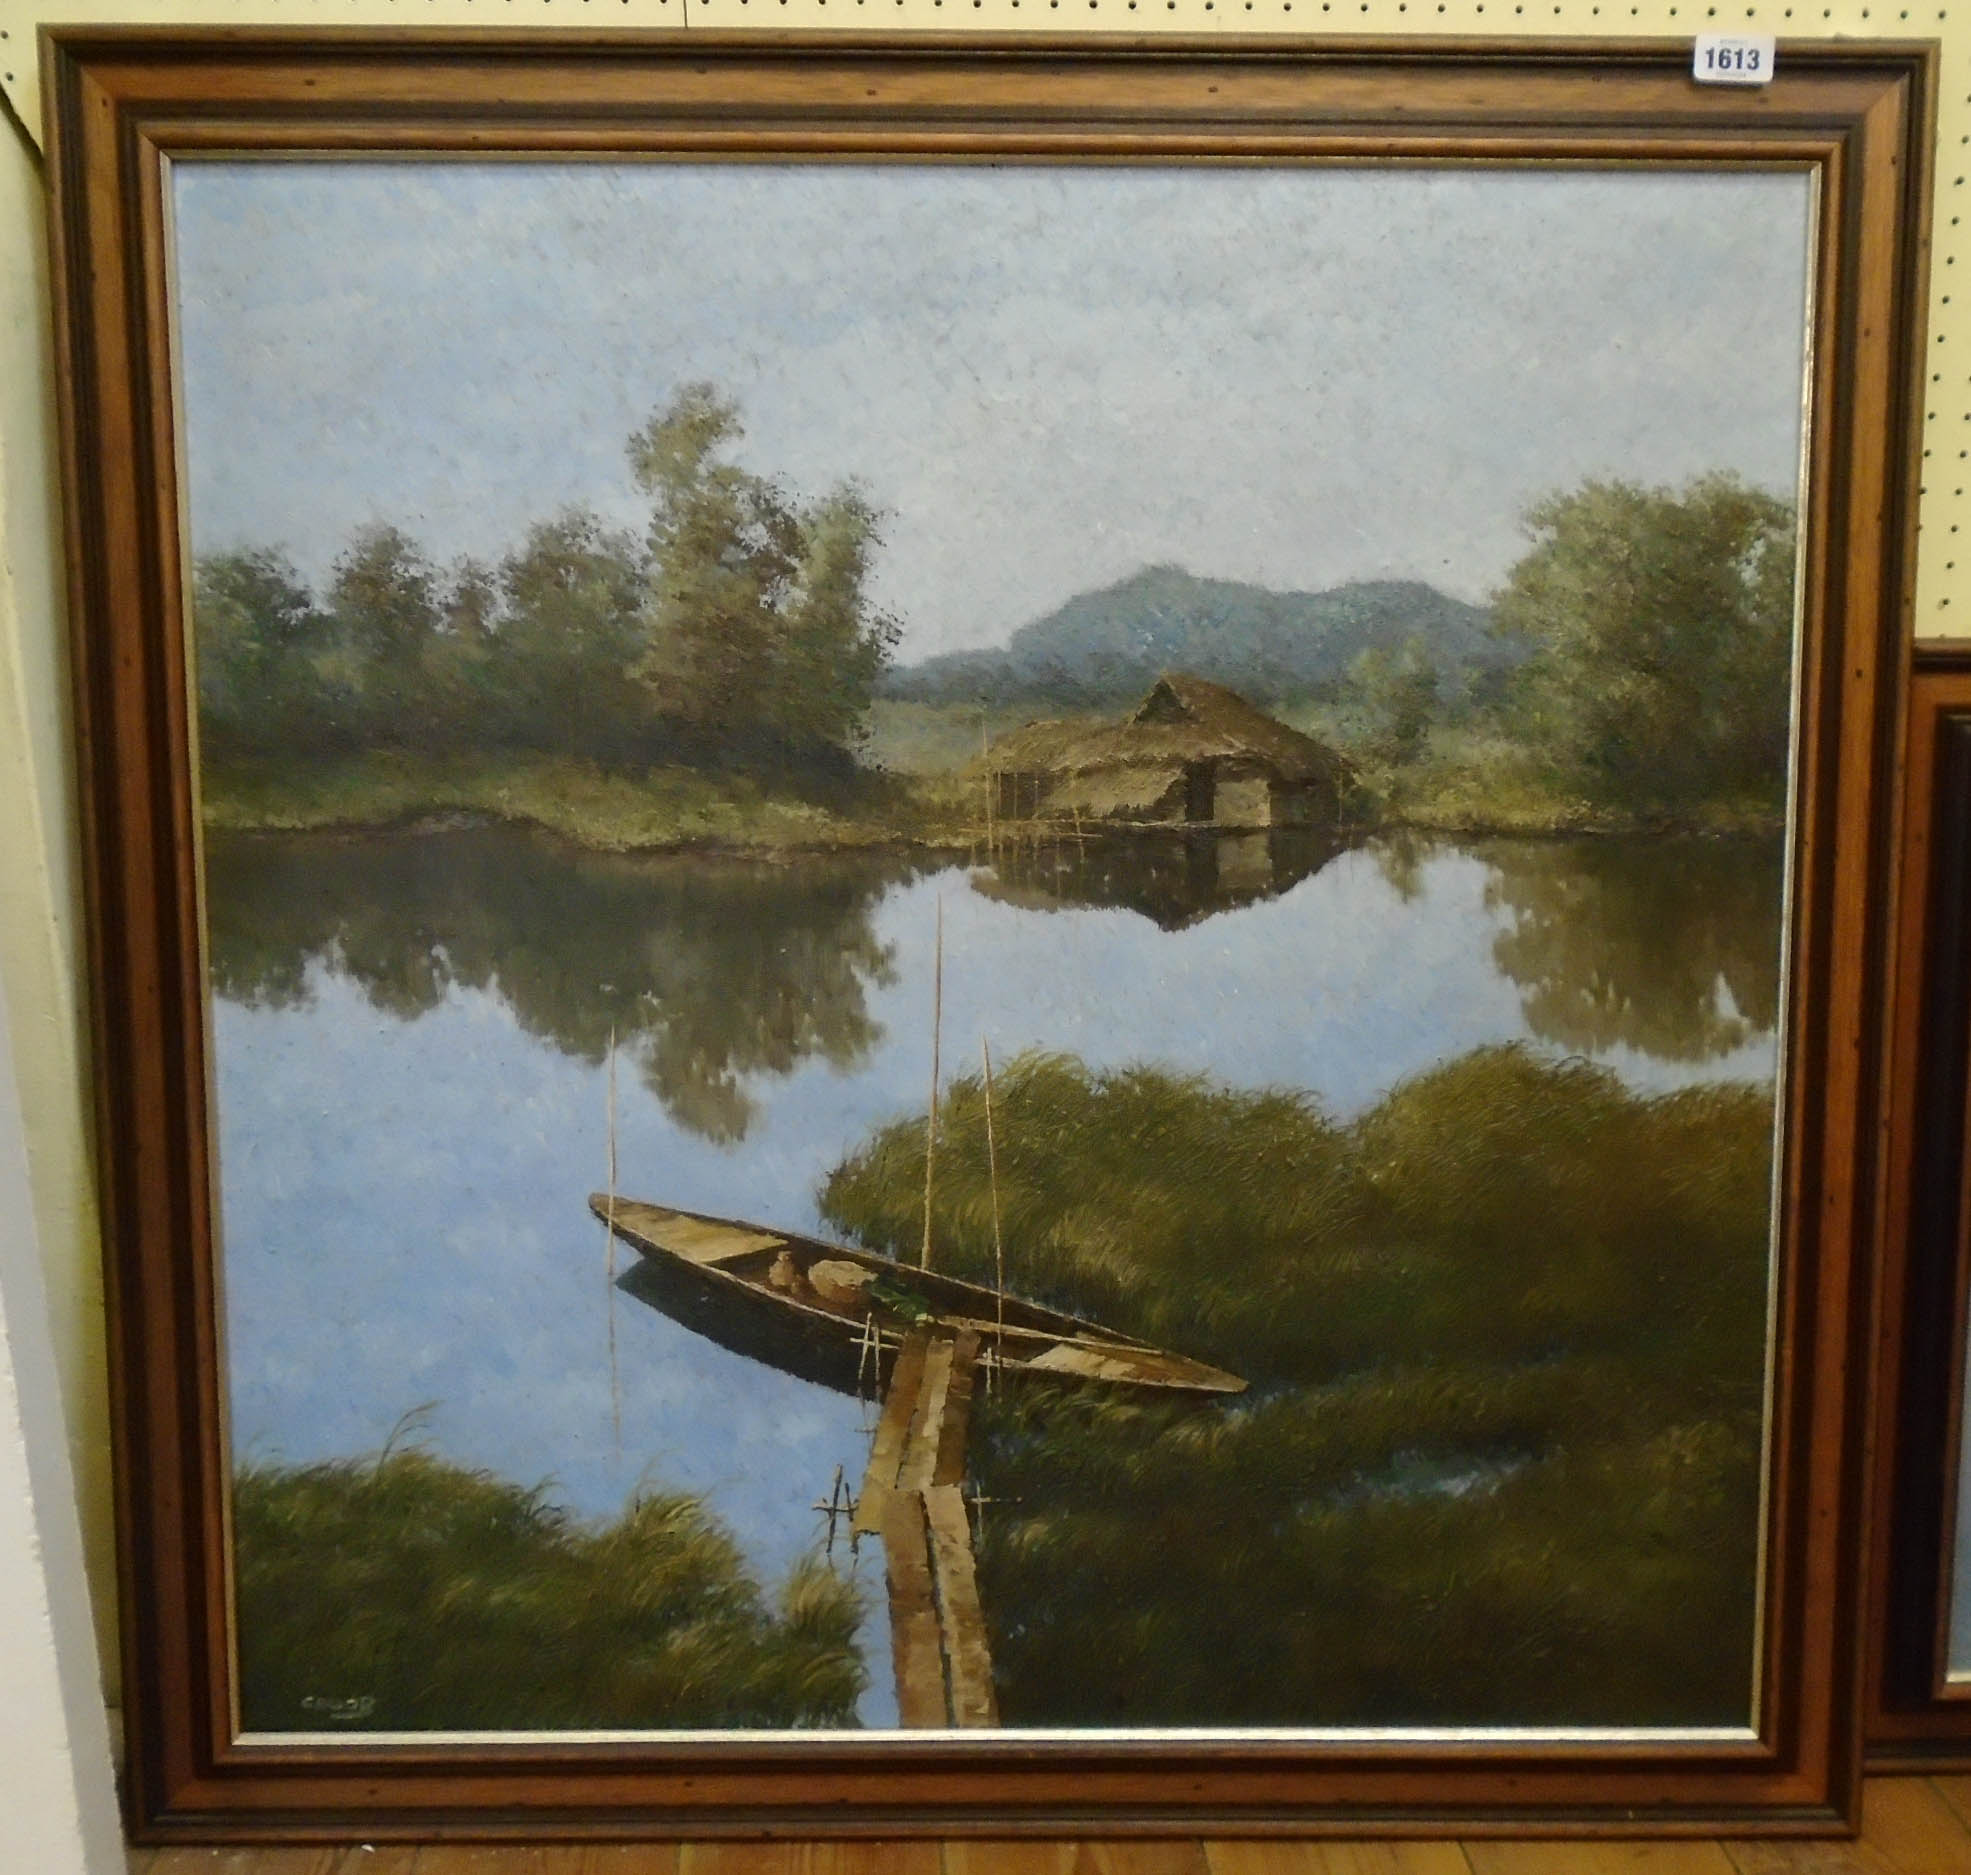 A pair of oriental scene oils on canvas, both depicting waterways, one with boat and house, the